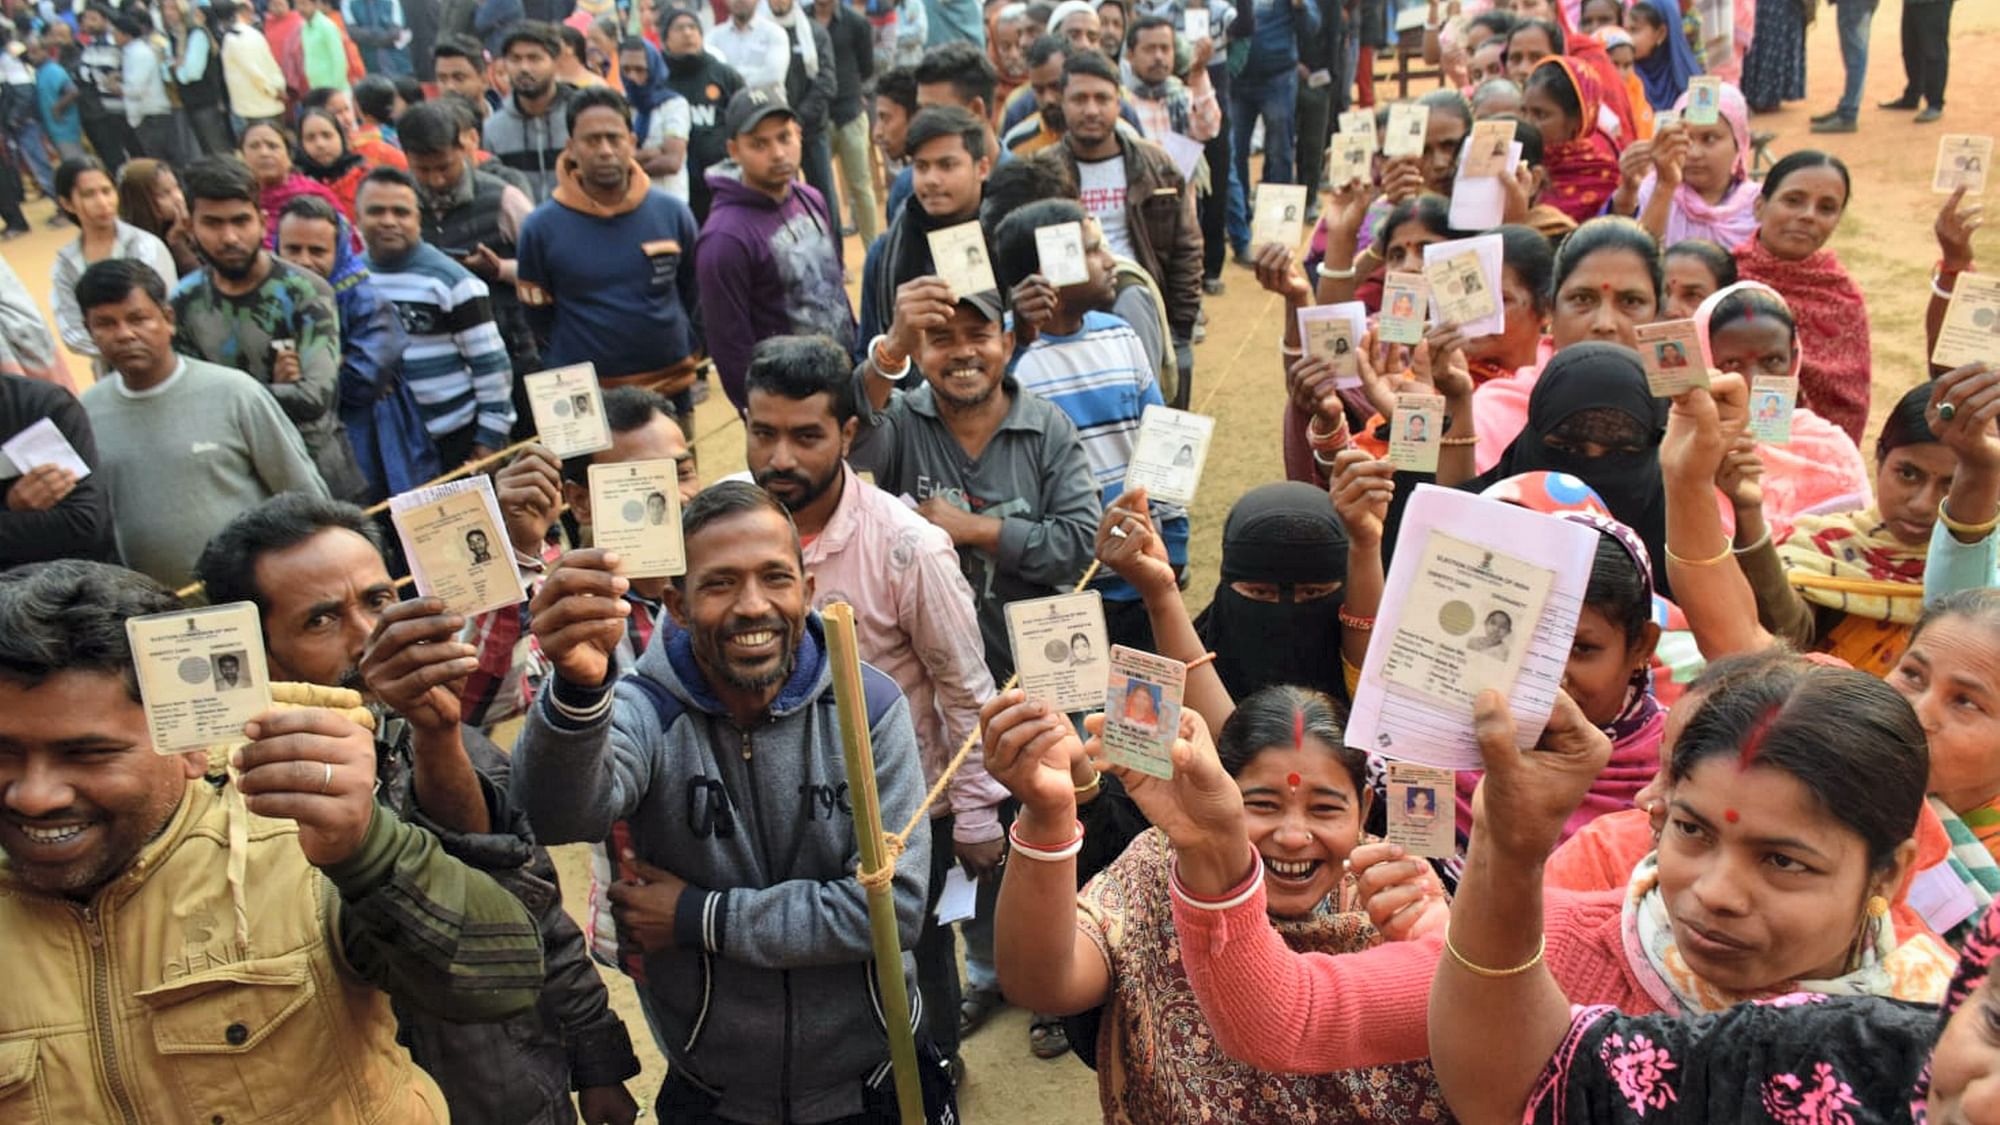 <div class="paragraphs"><p>Rajnagar: Voters show their identification cards as they wait in queues to cast their votes at a polling booth during the Tripura Assembly elections in Rajnagar on Thursday, 16 February.</p></div>